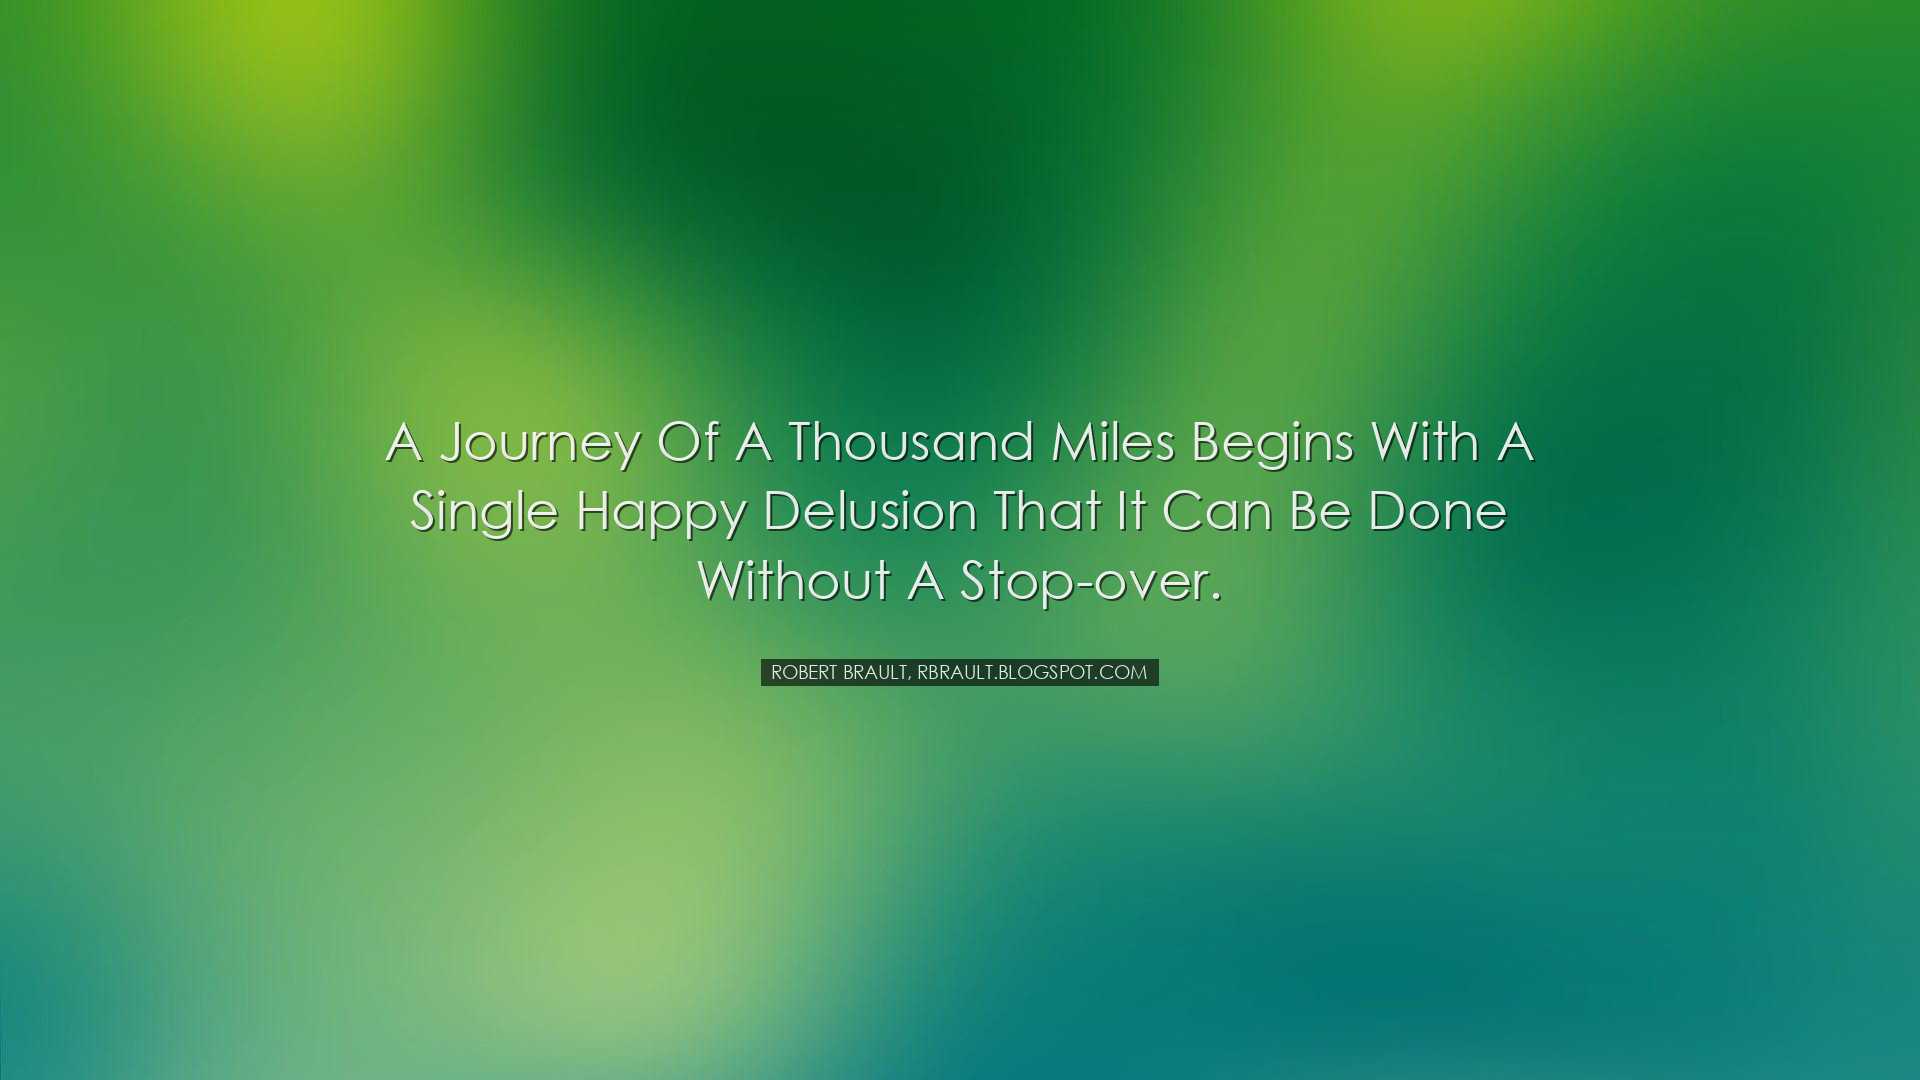 A journey of a thousand miles begins with a single happy delusion